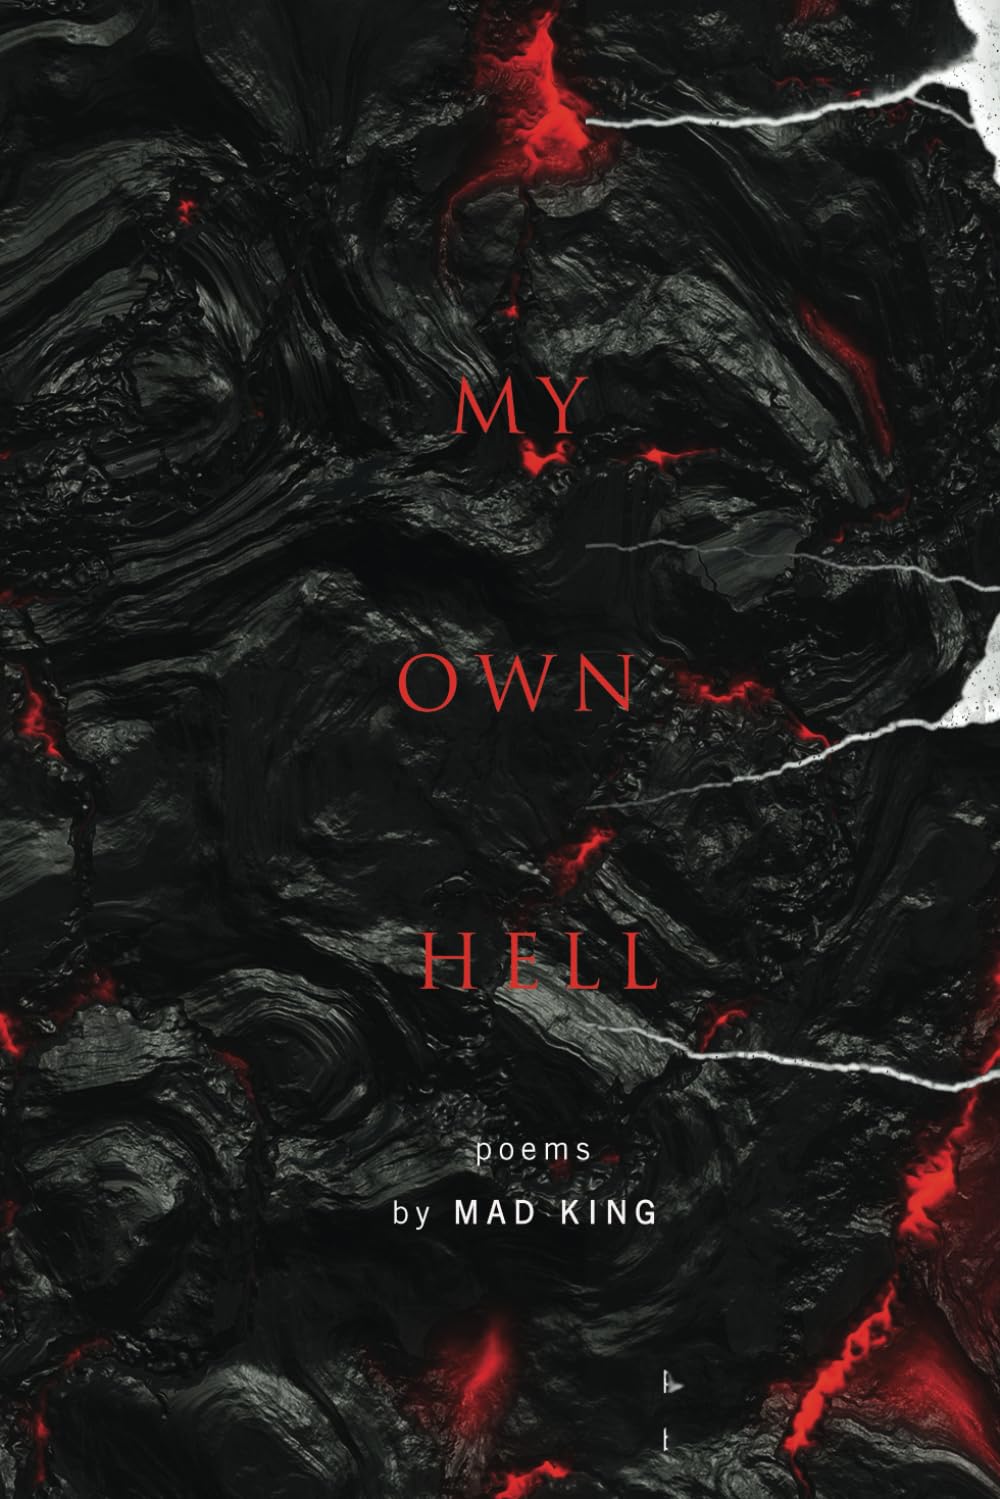 Introducing "My Own Hell" by Mad King: A Raw and Introspective Journey Through Darkness and Redemption